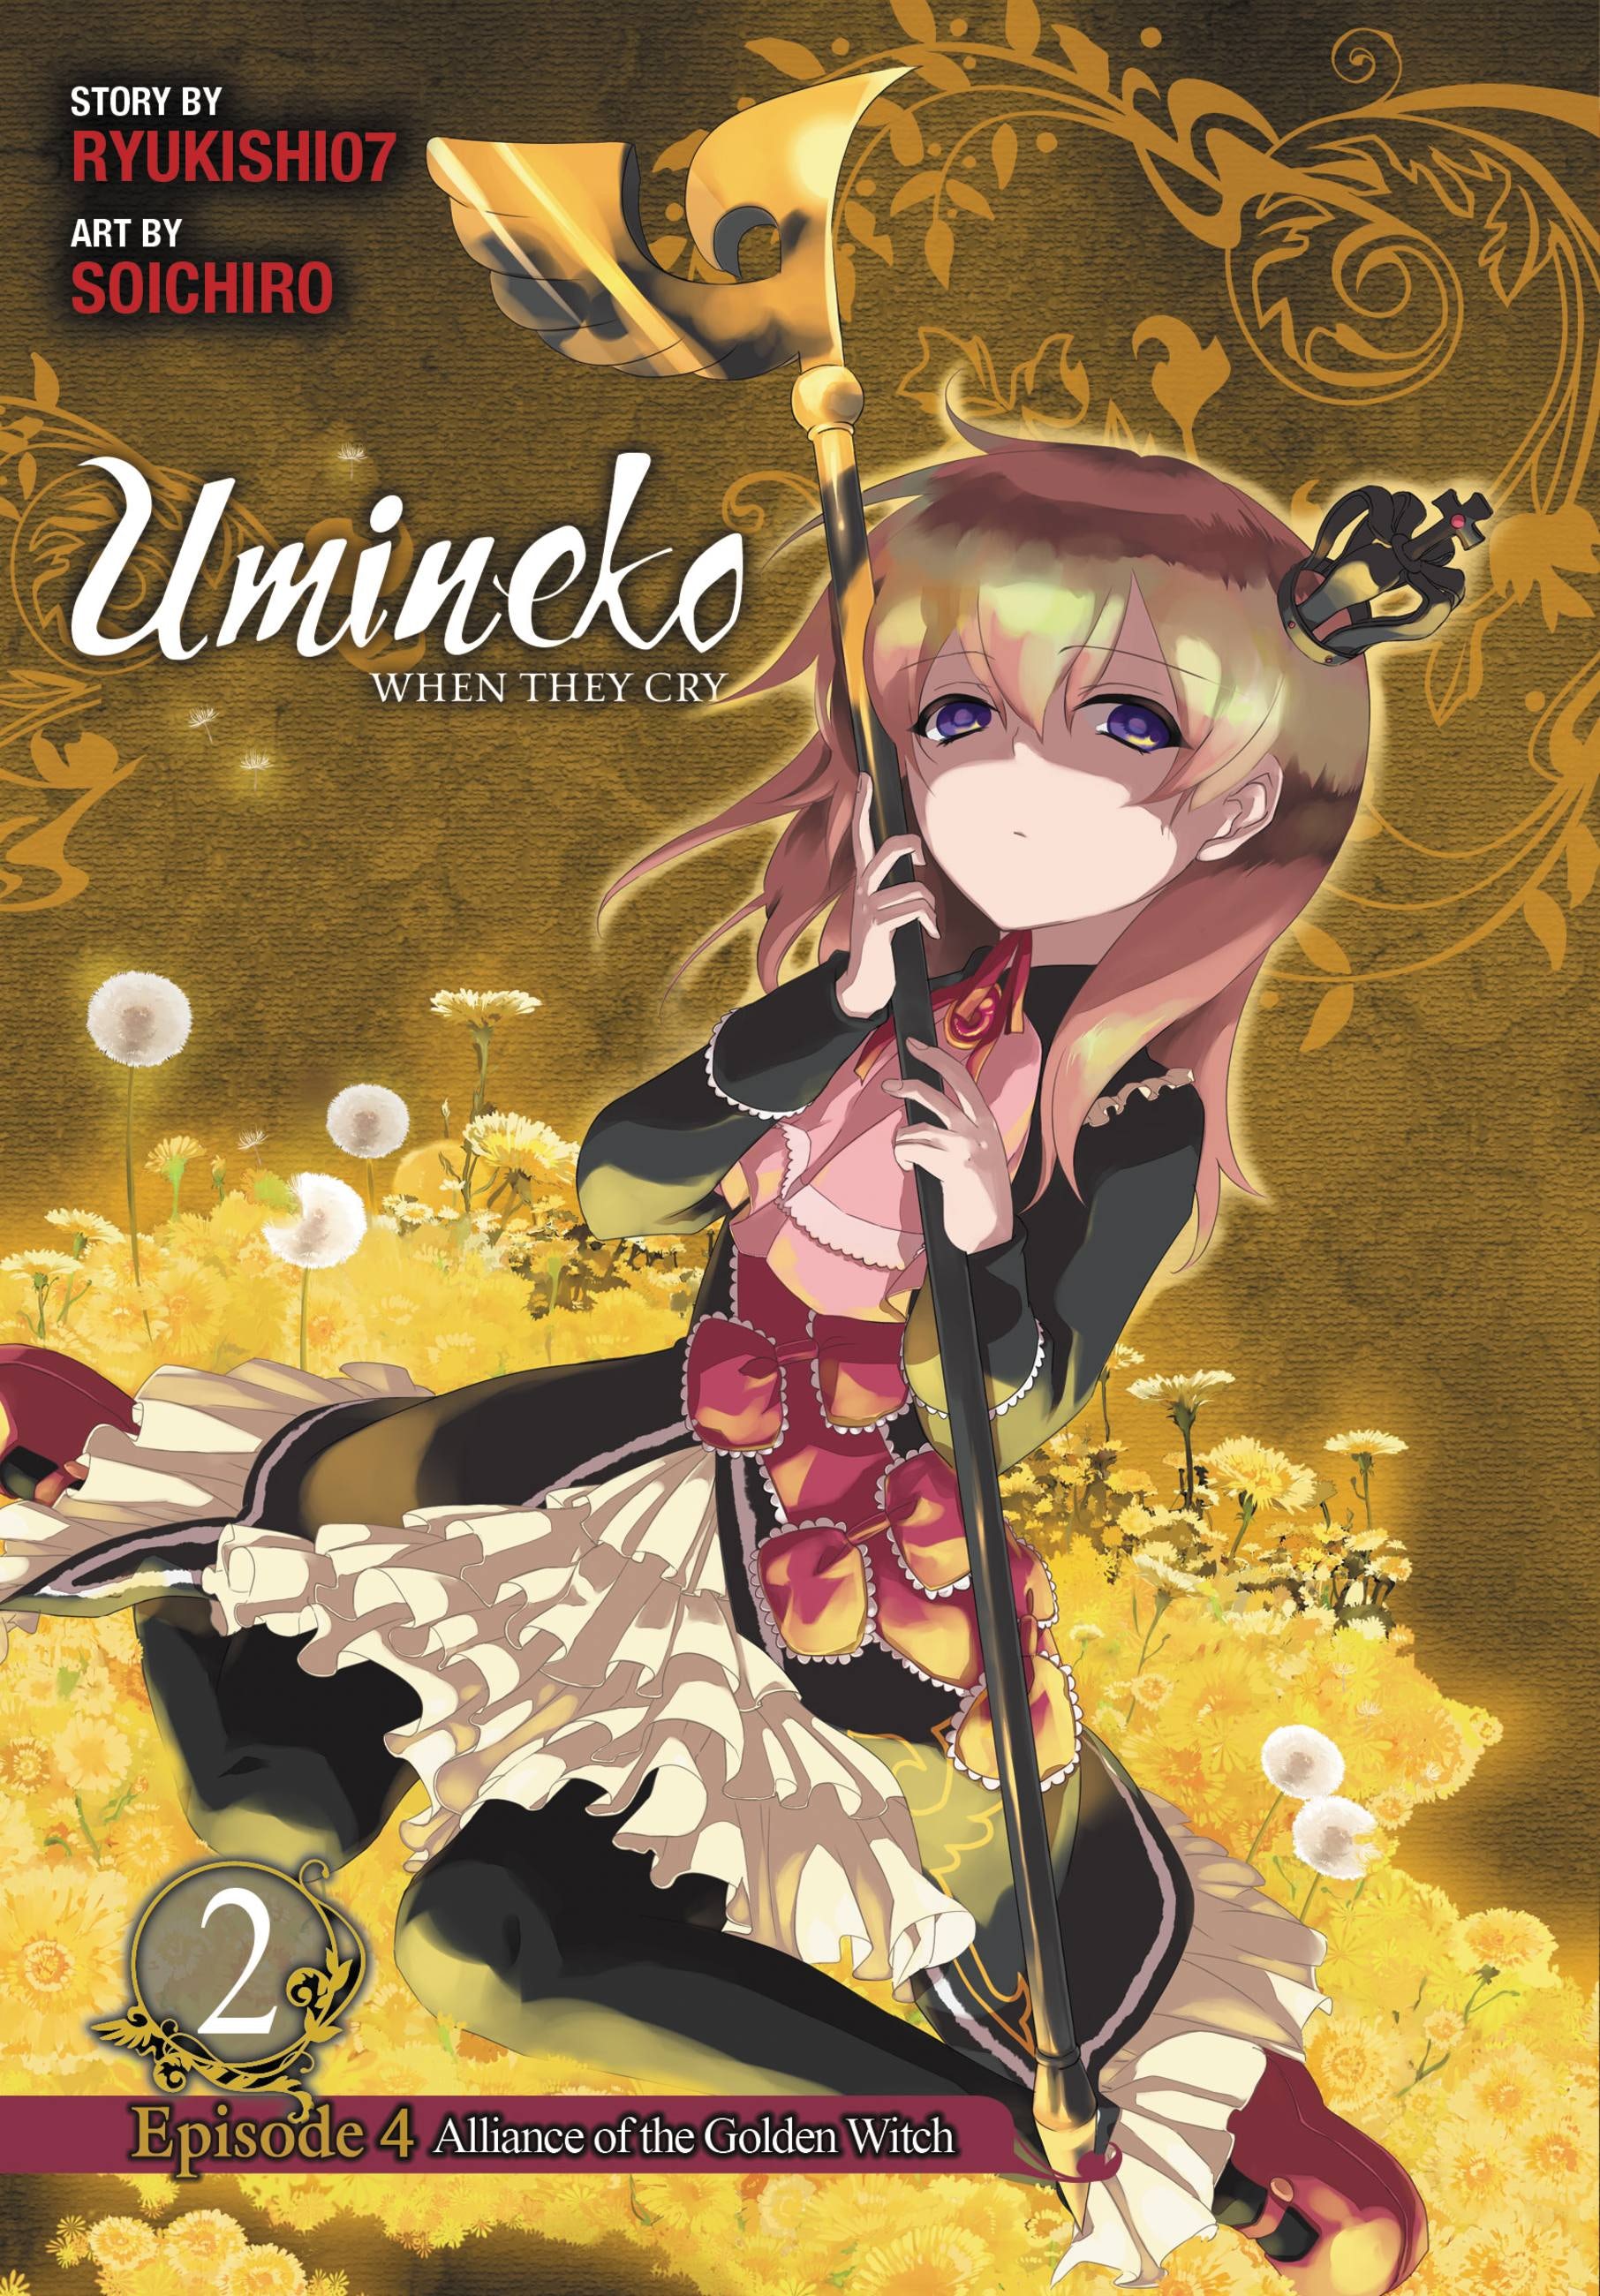 Product Image: Umineko WHEN THEY CRY Episode 4: Alliance of the Golden Witch, Vol. 2